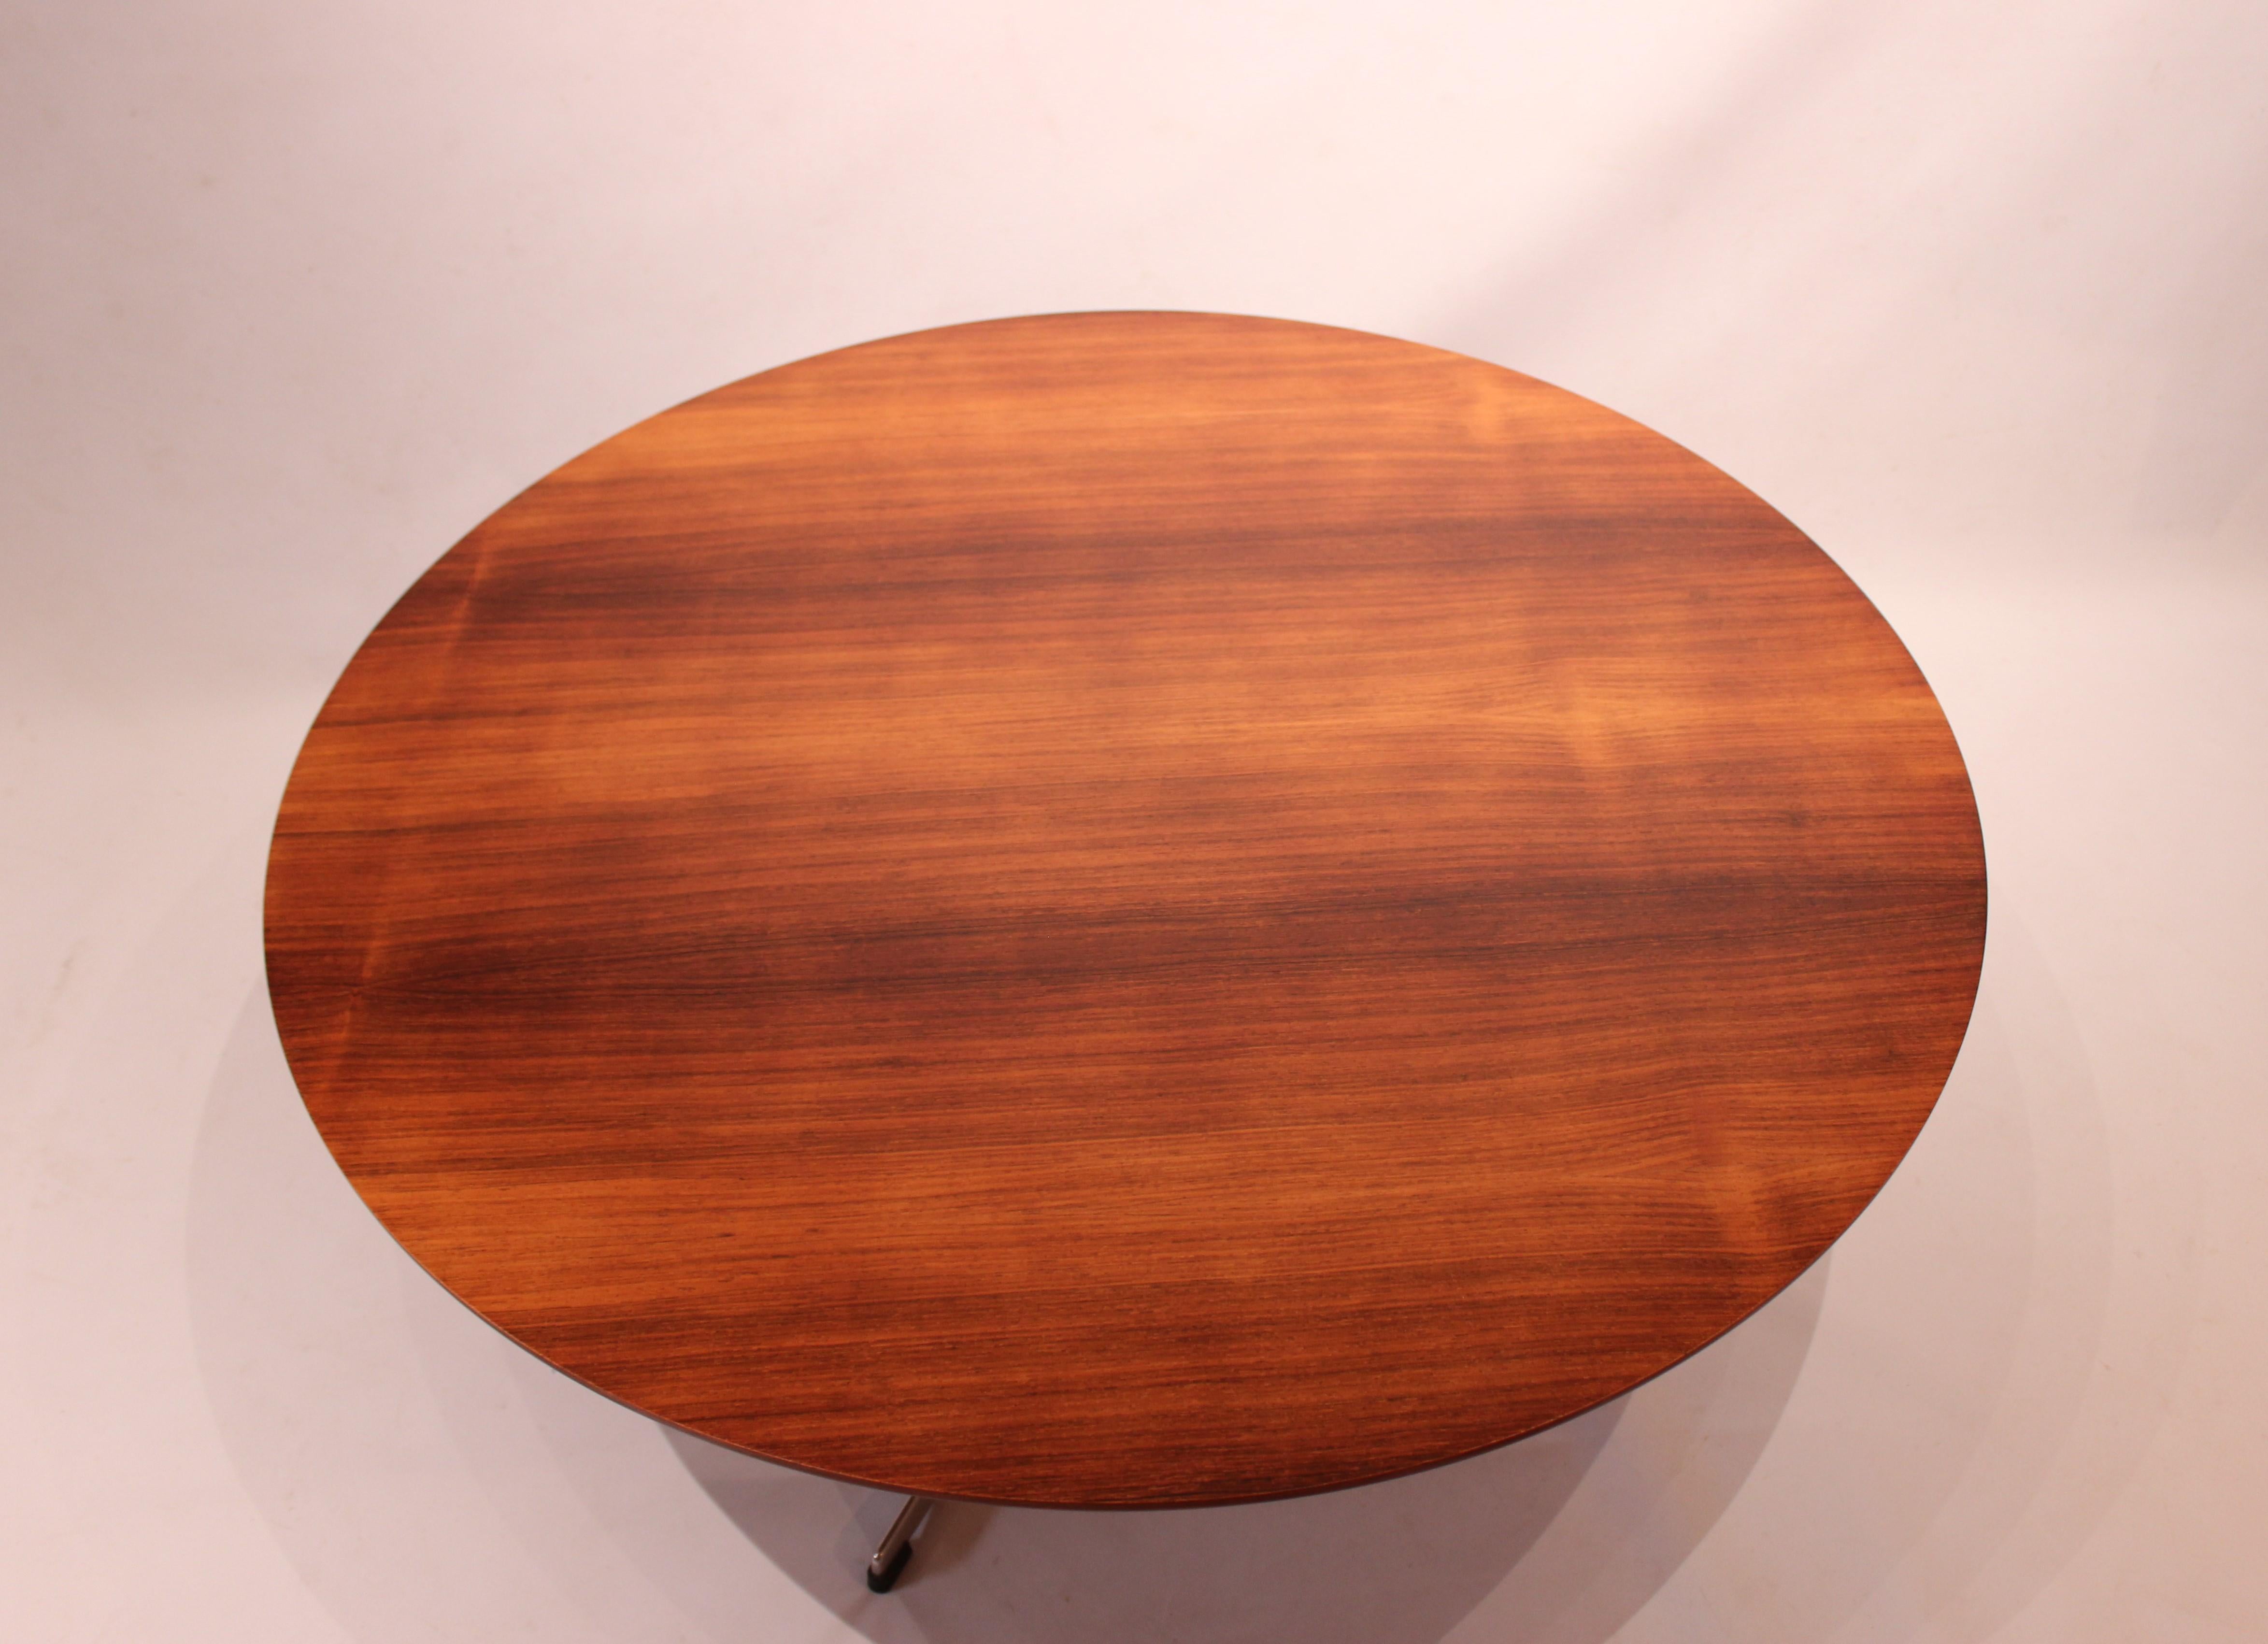 Round coffee table, model 3513, designed by Arne Jacobsen and manufactured by Fritz Hansen in the 1960s. The table is of rosewood and in great vintage condition.